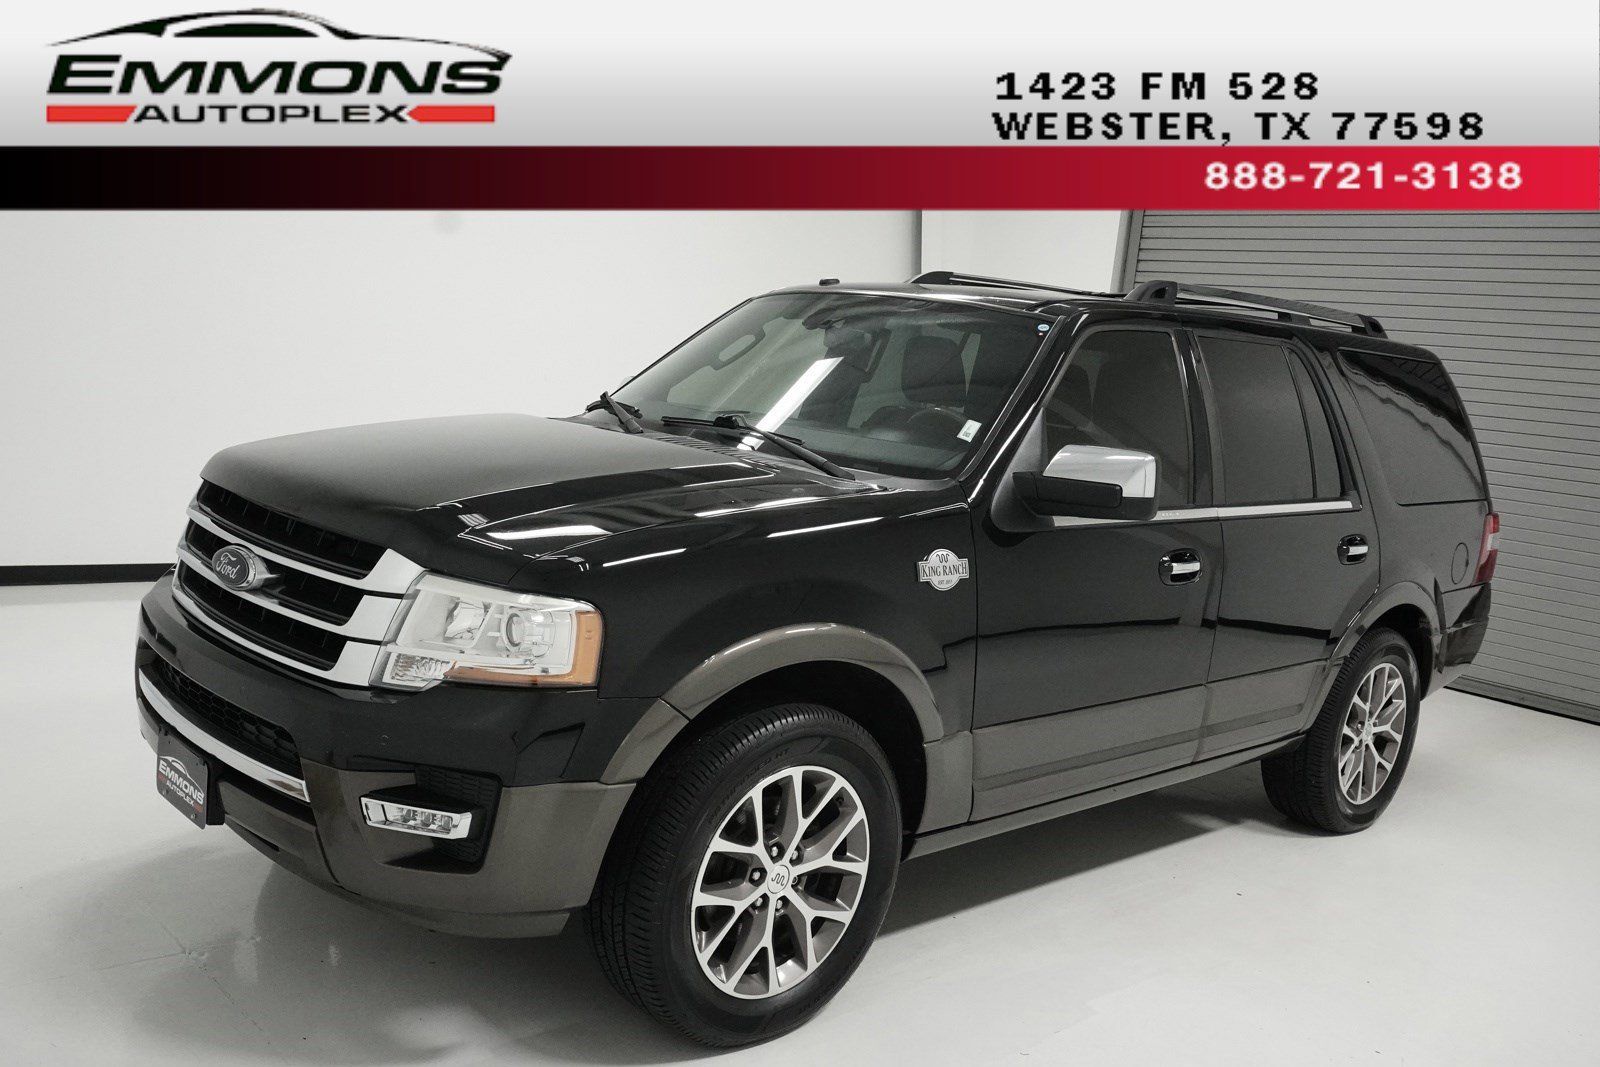 Used 2017 Ford Expedition